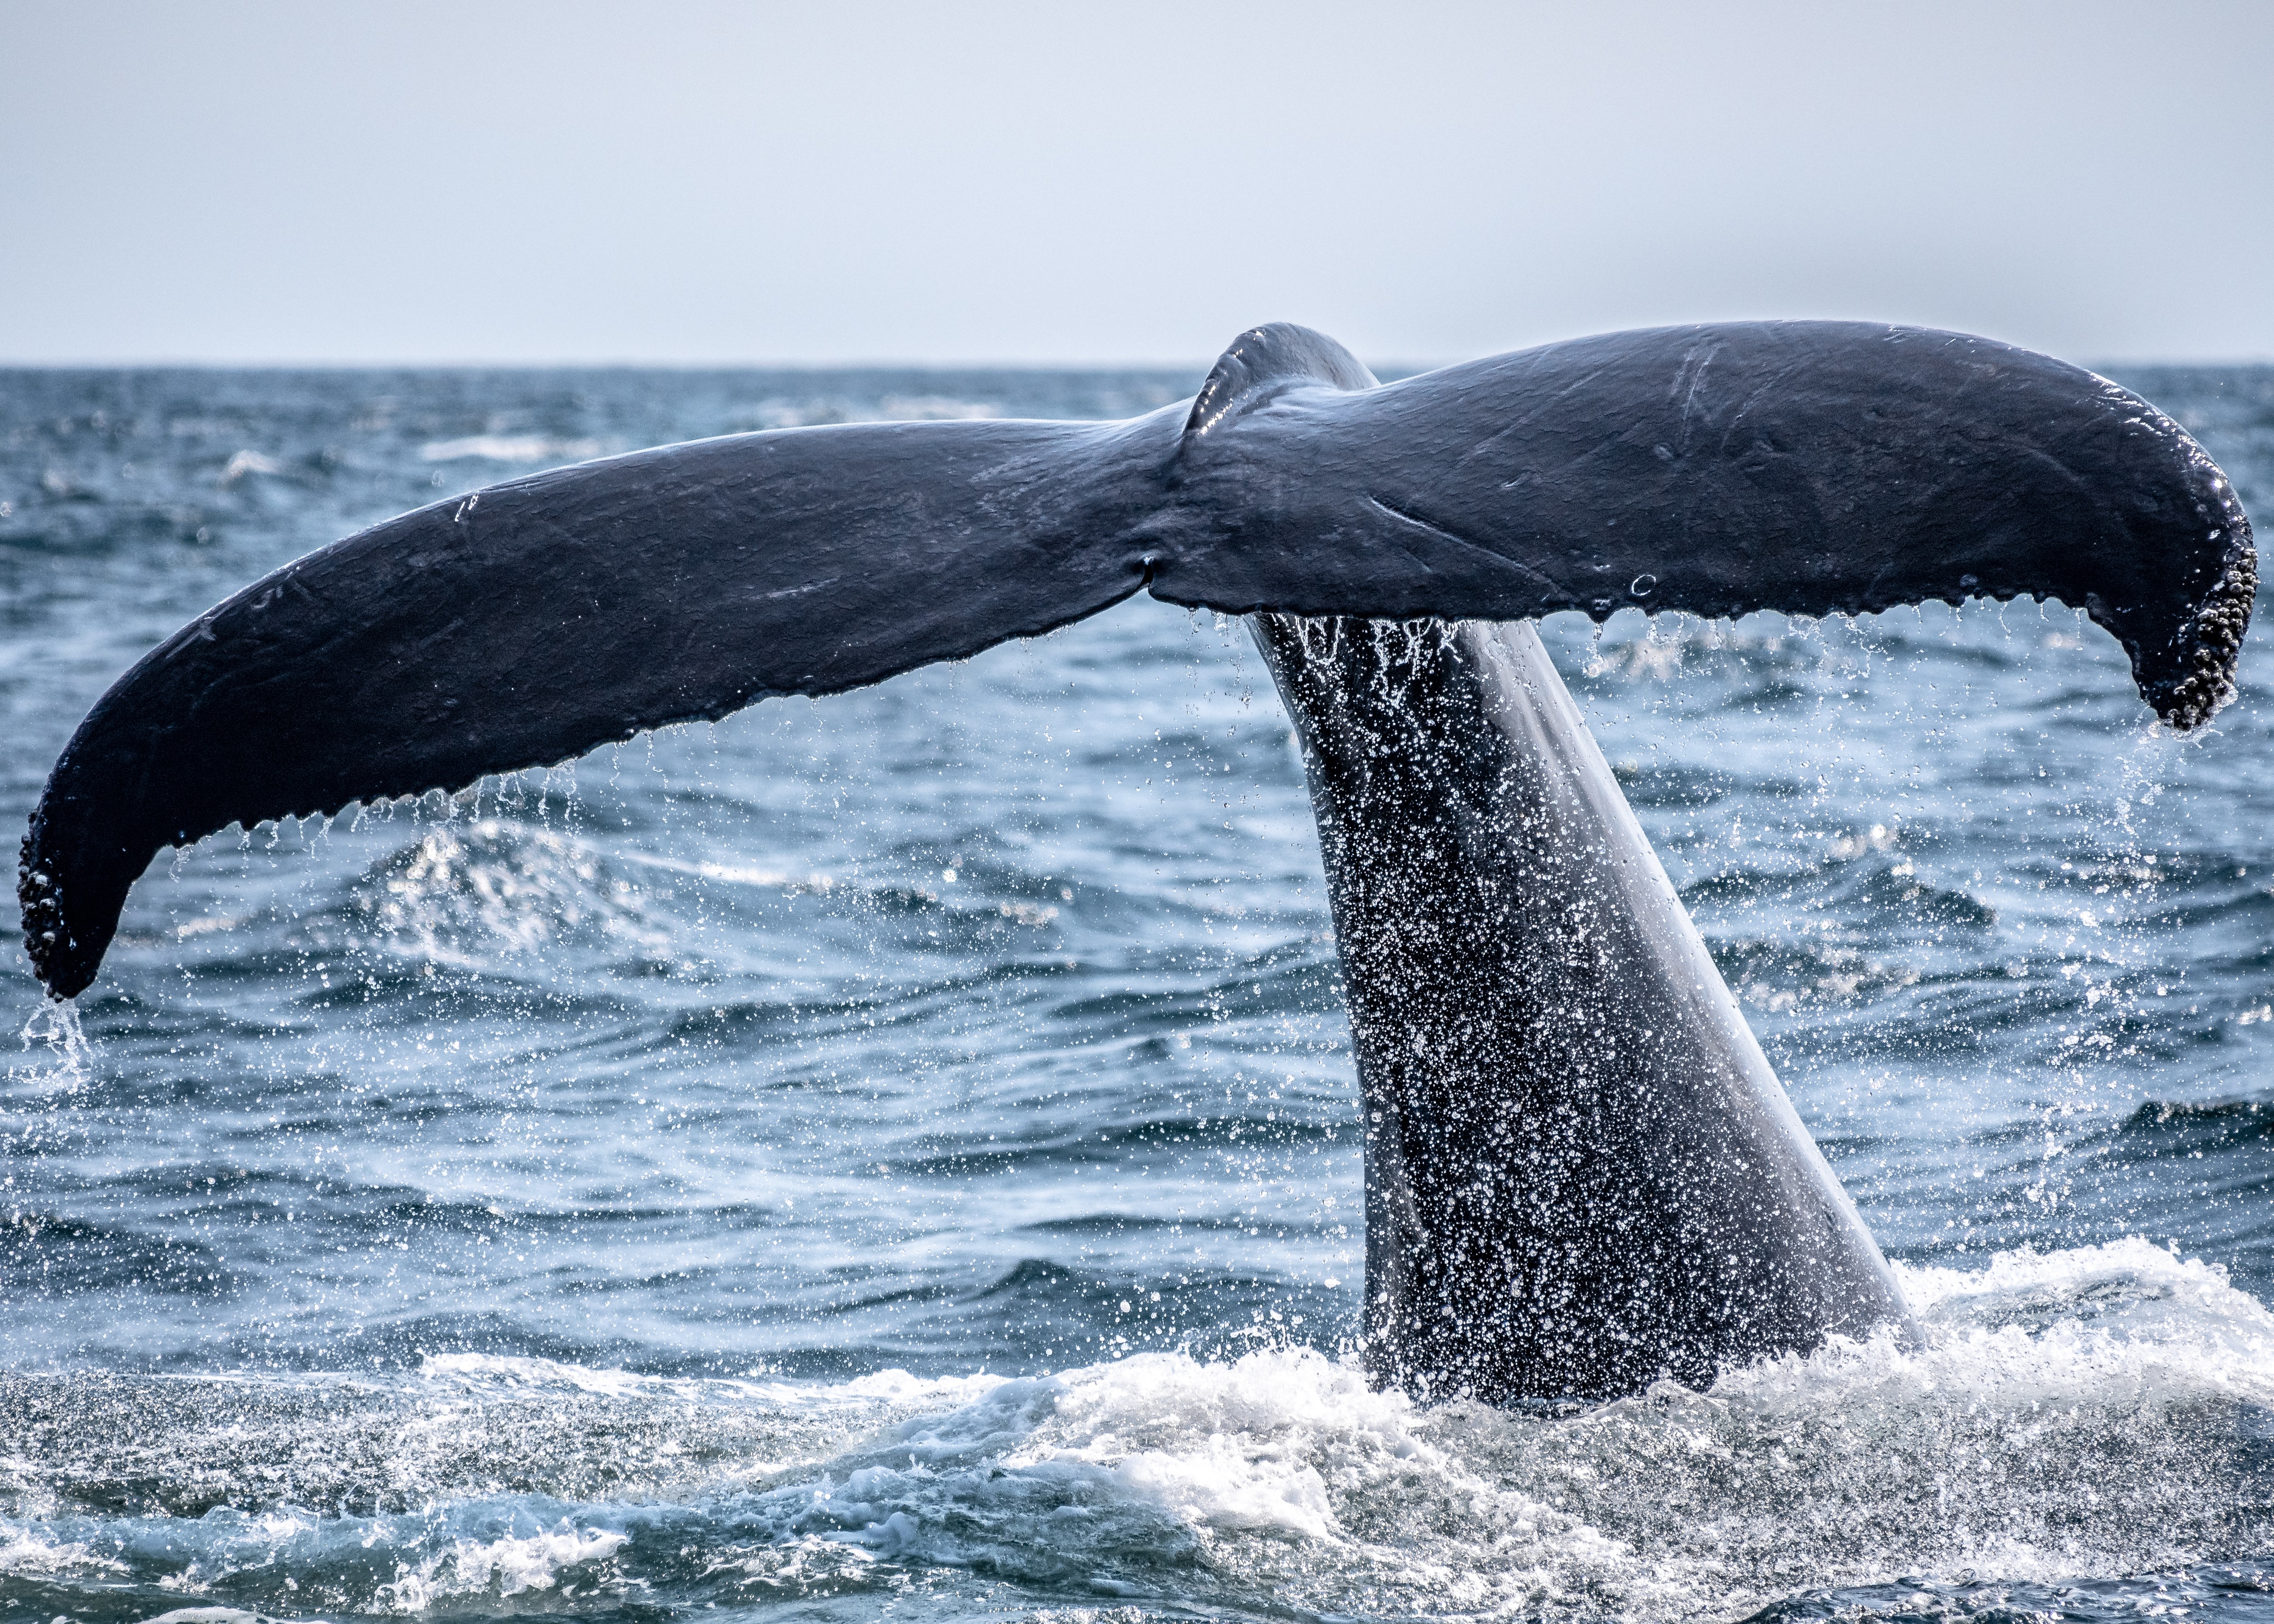 On-Chain Data: Bitcoin Whales Buy The Dip As BTC Drops To $39k